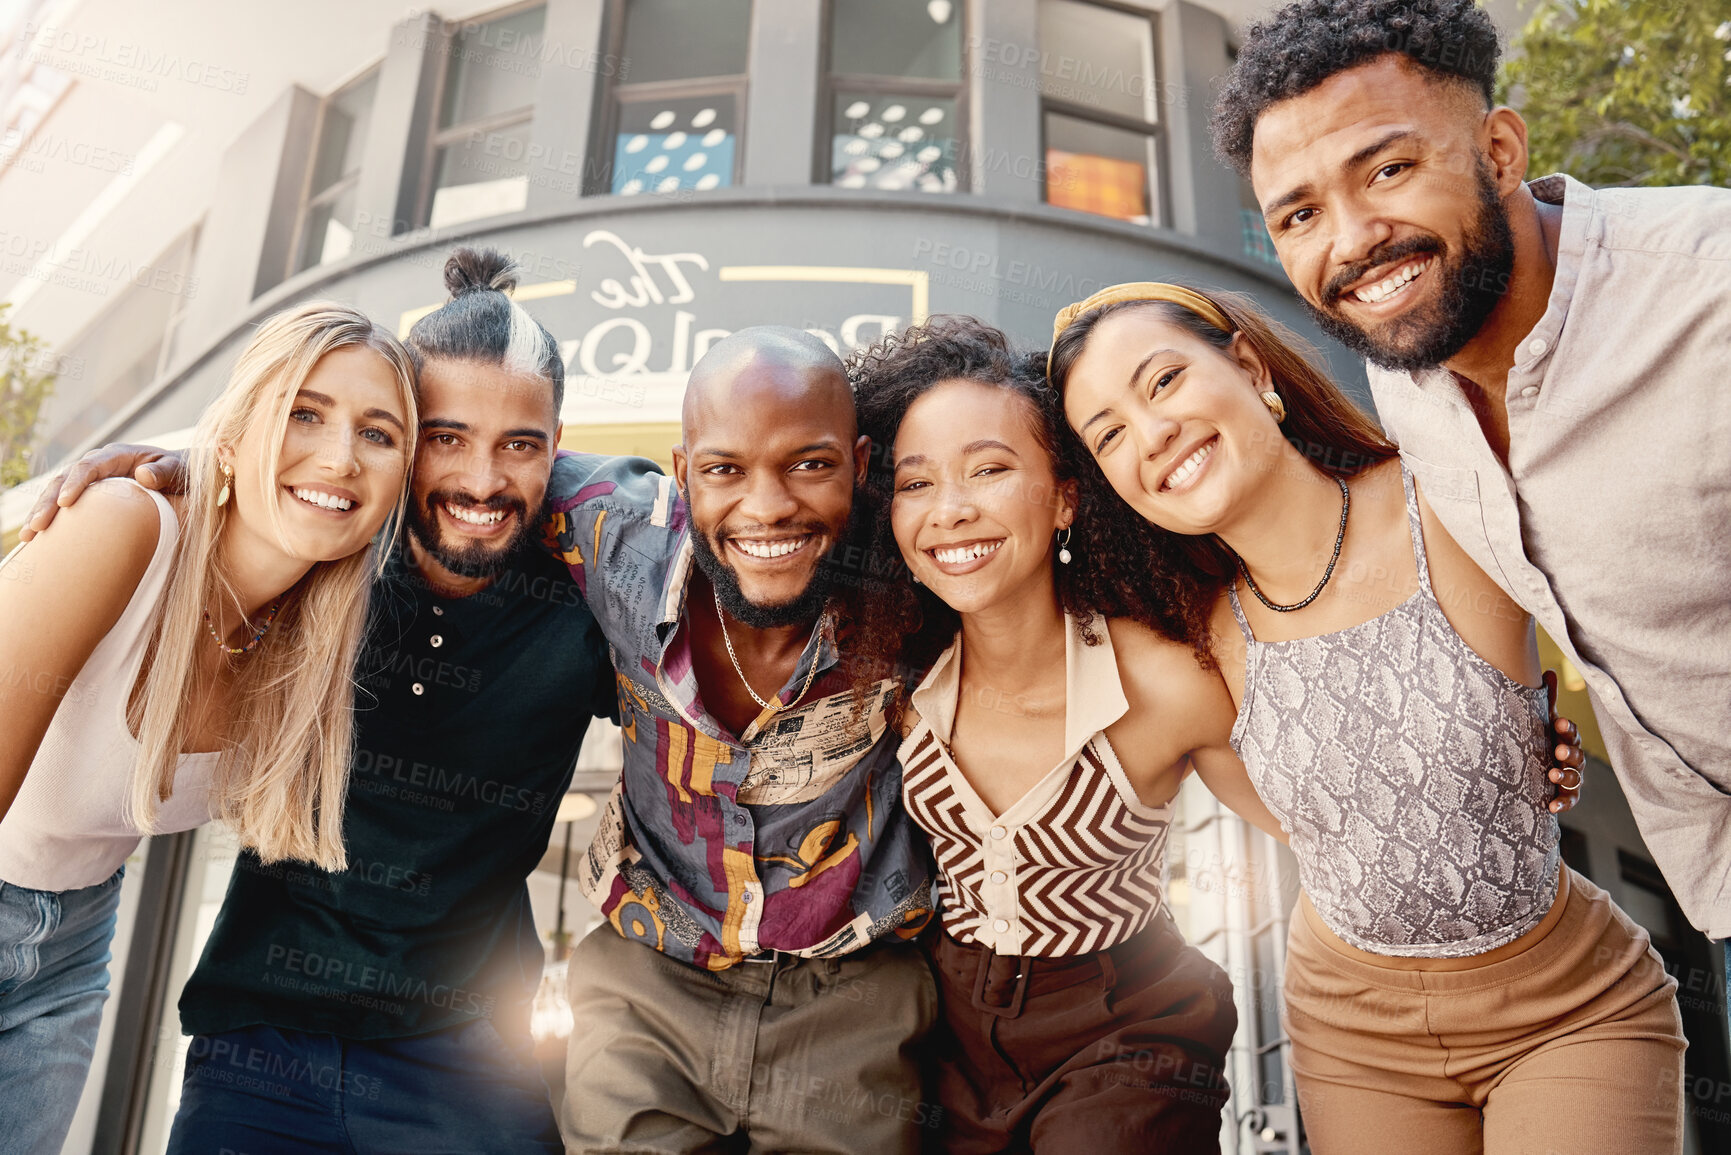 Buy stock photo Shot of a group of young friends taking selfies together at a restaurant